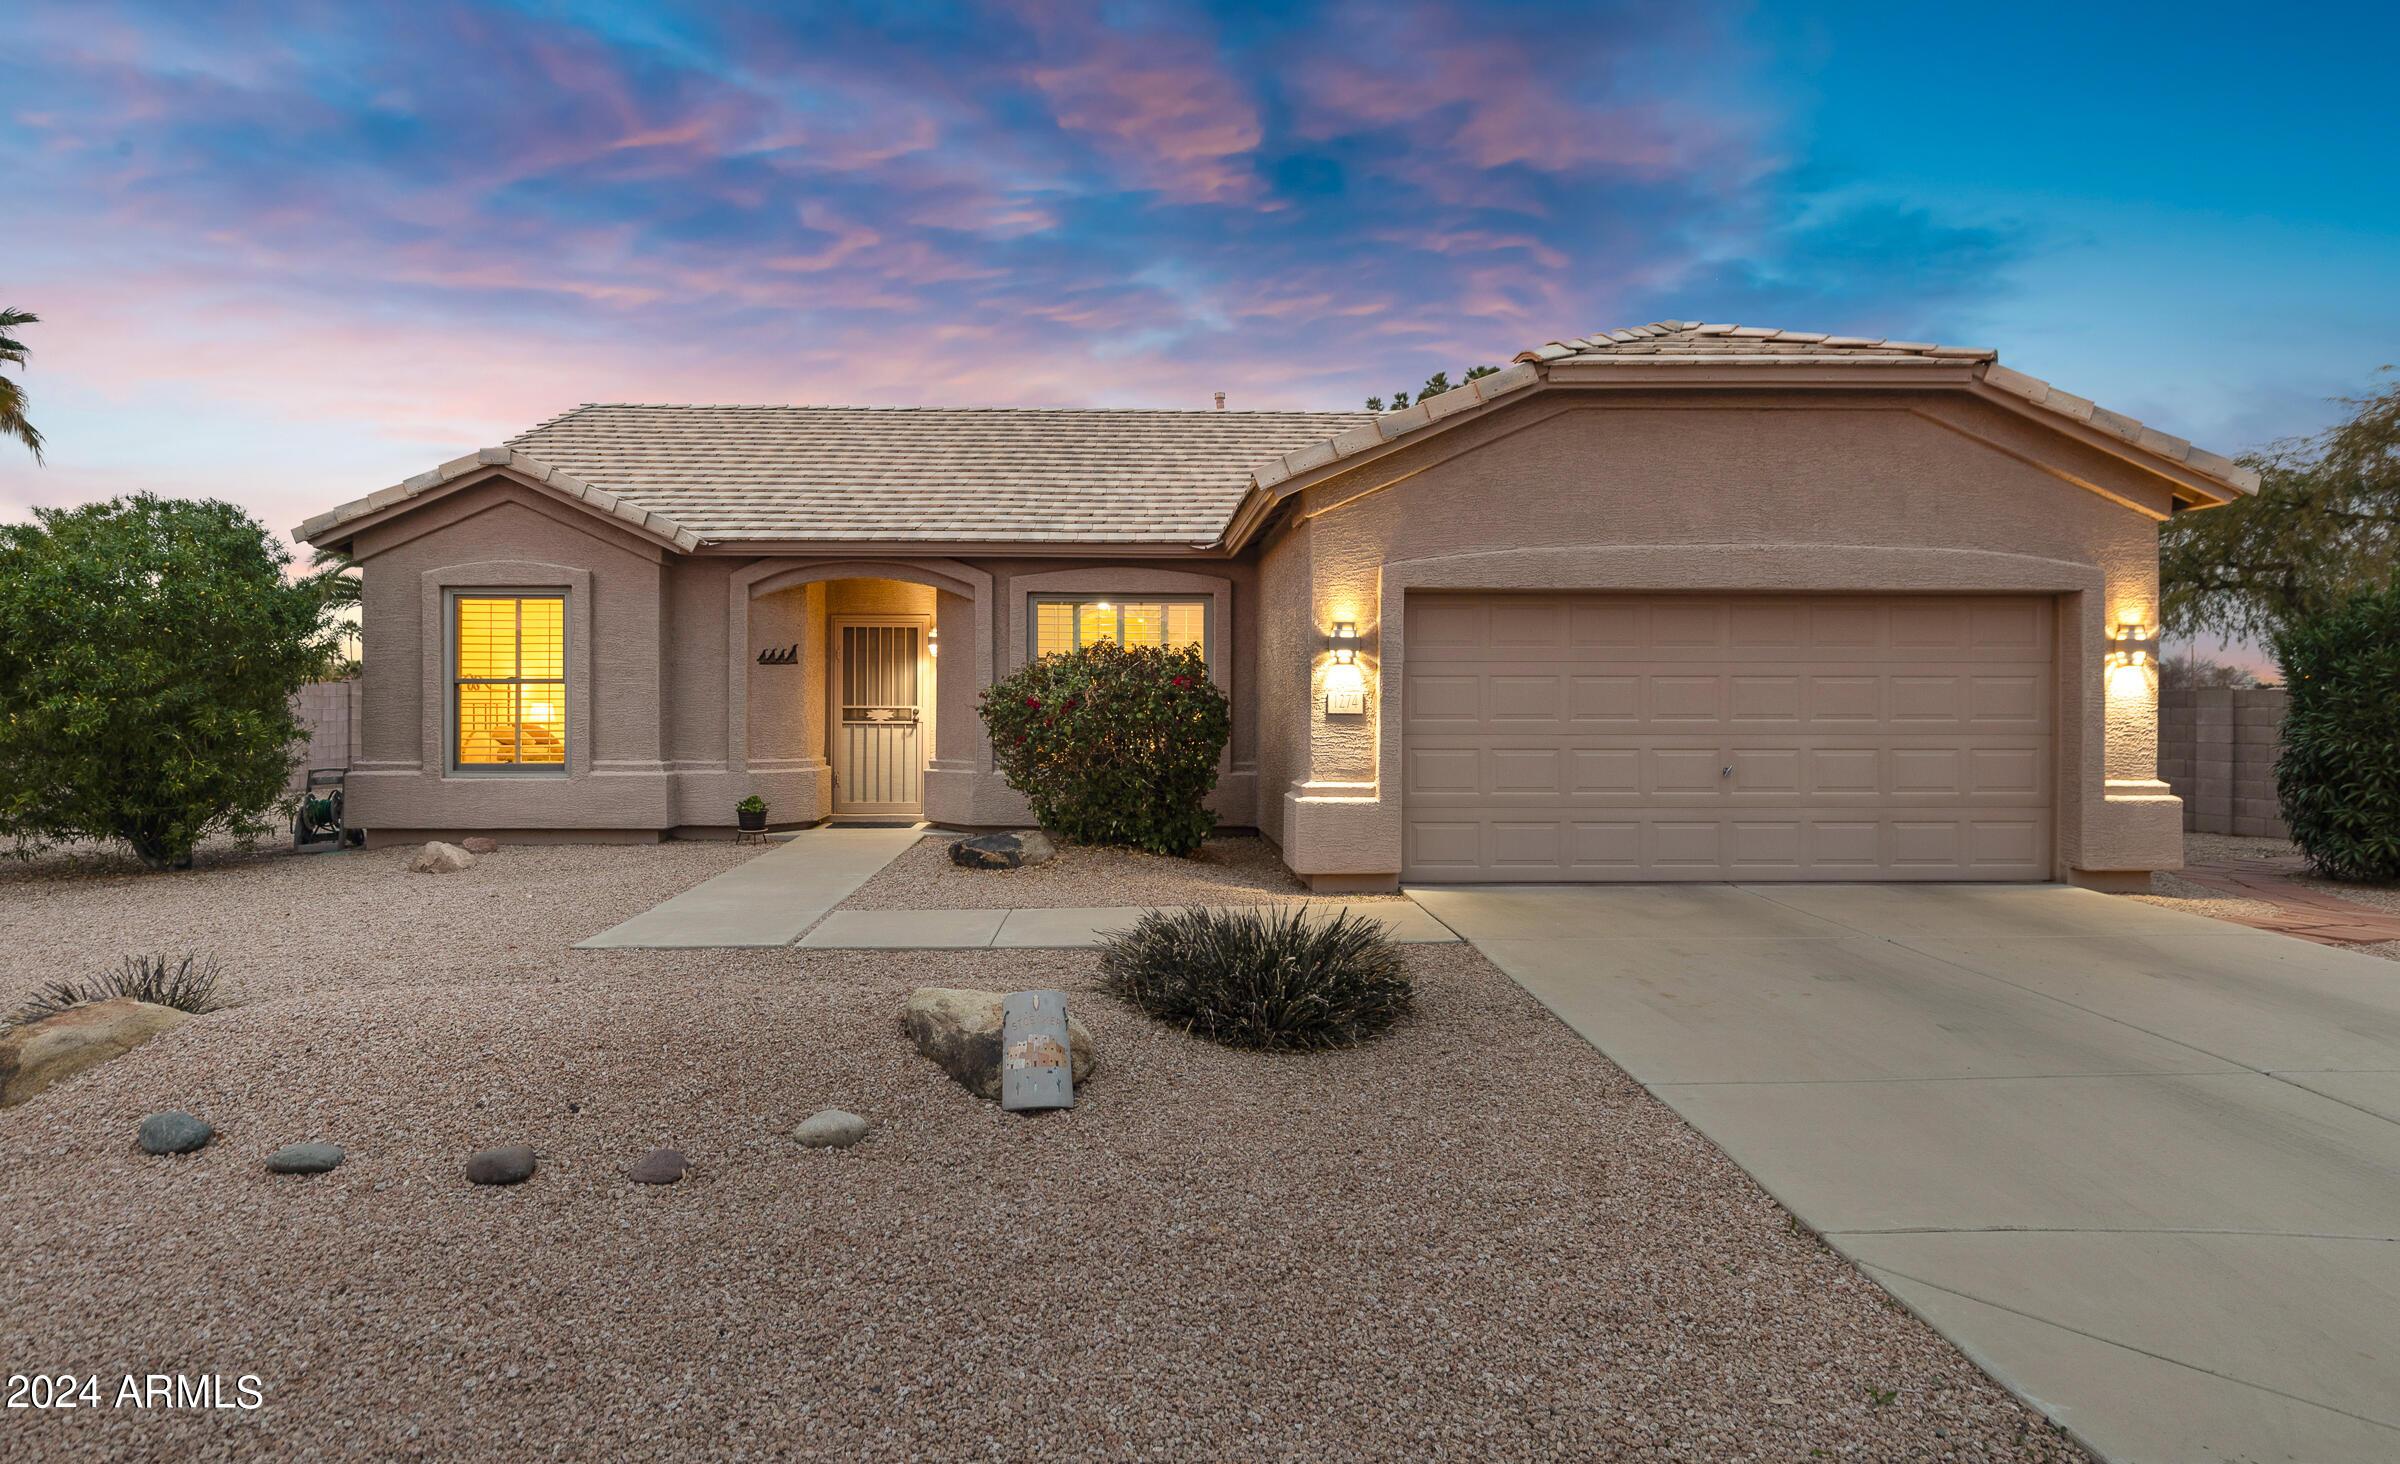 Photo one of 1274 E Waterview Pl Chandler AZ 85249 | MLS 6647390